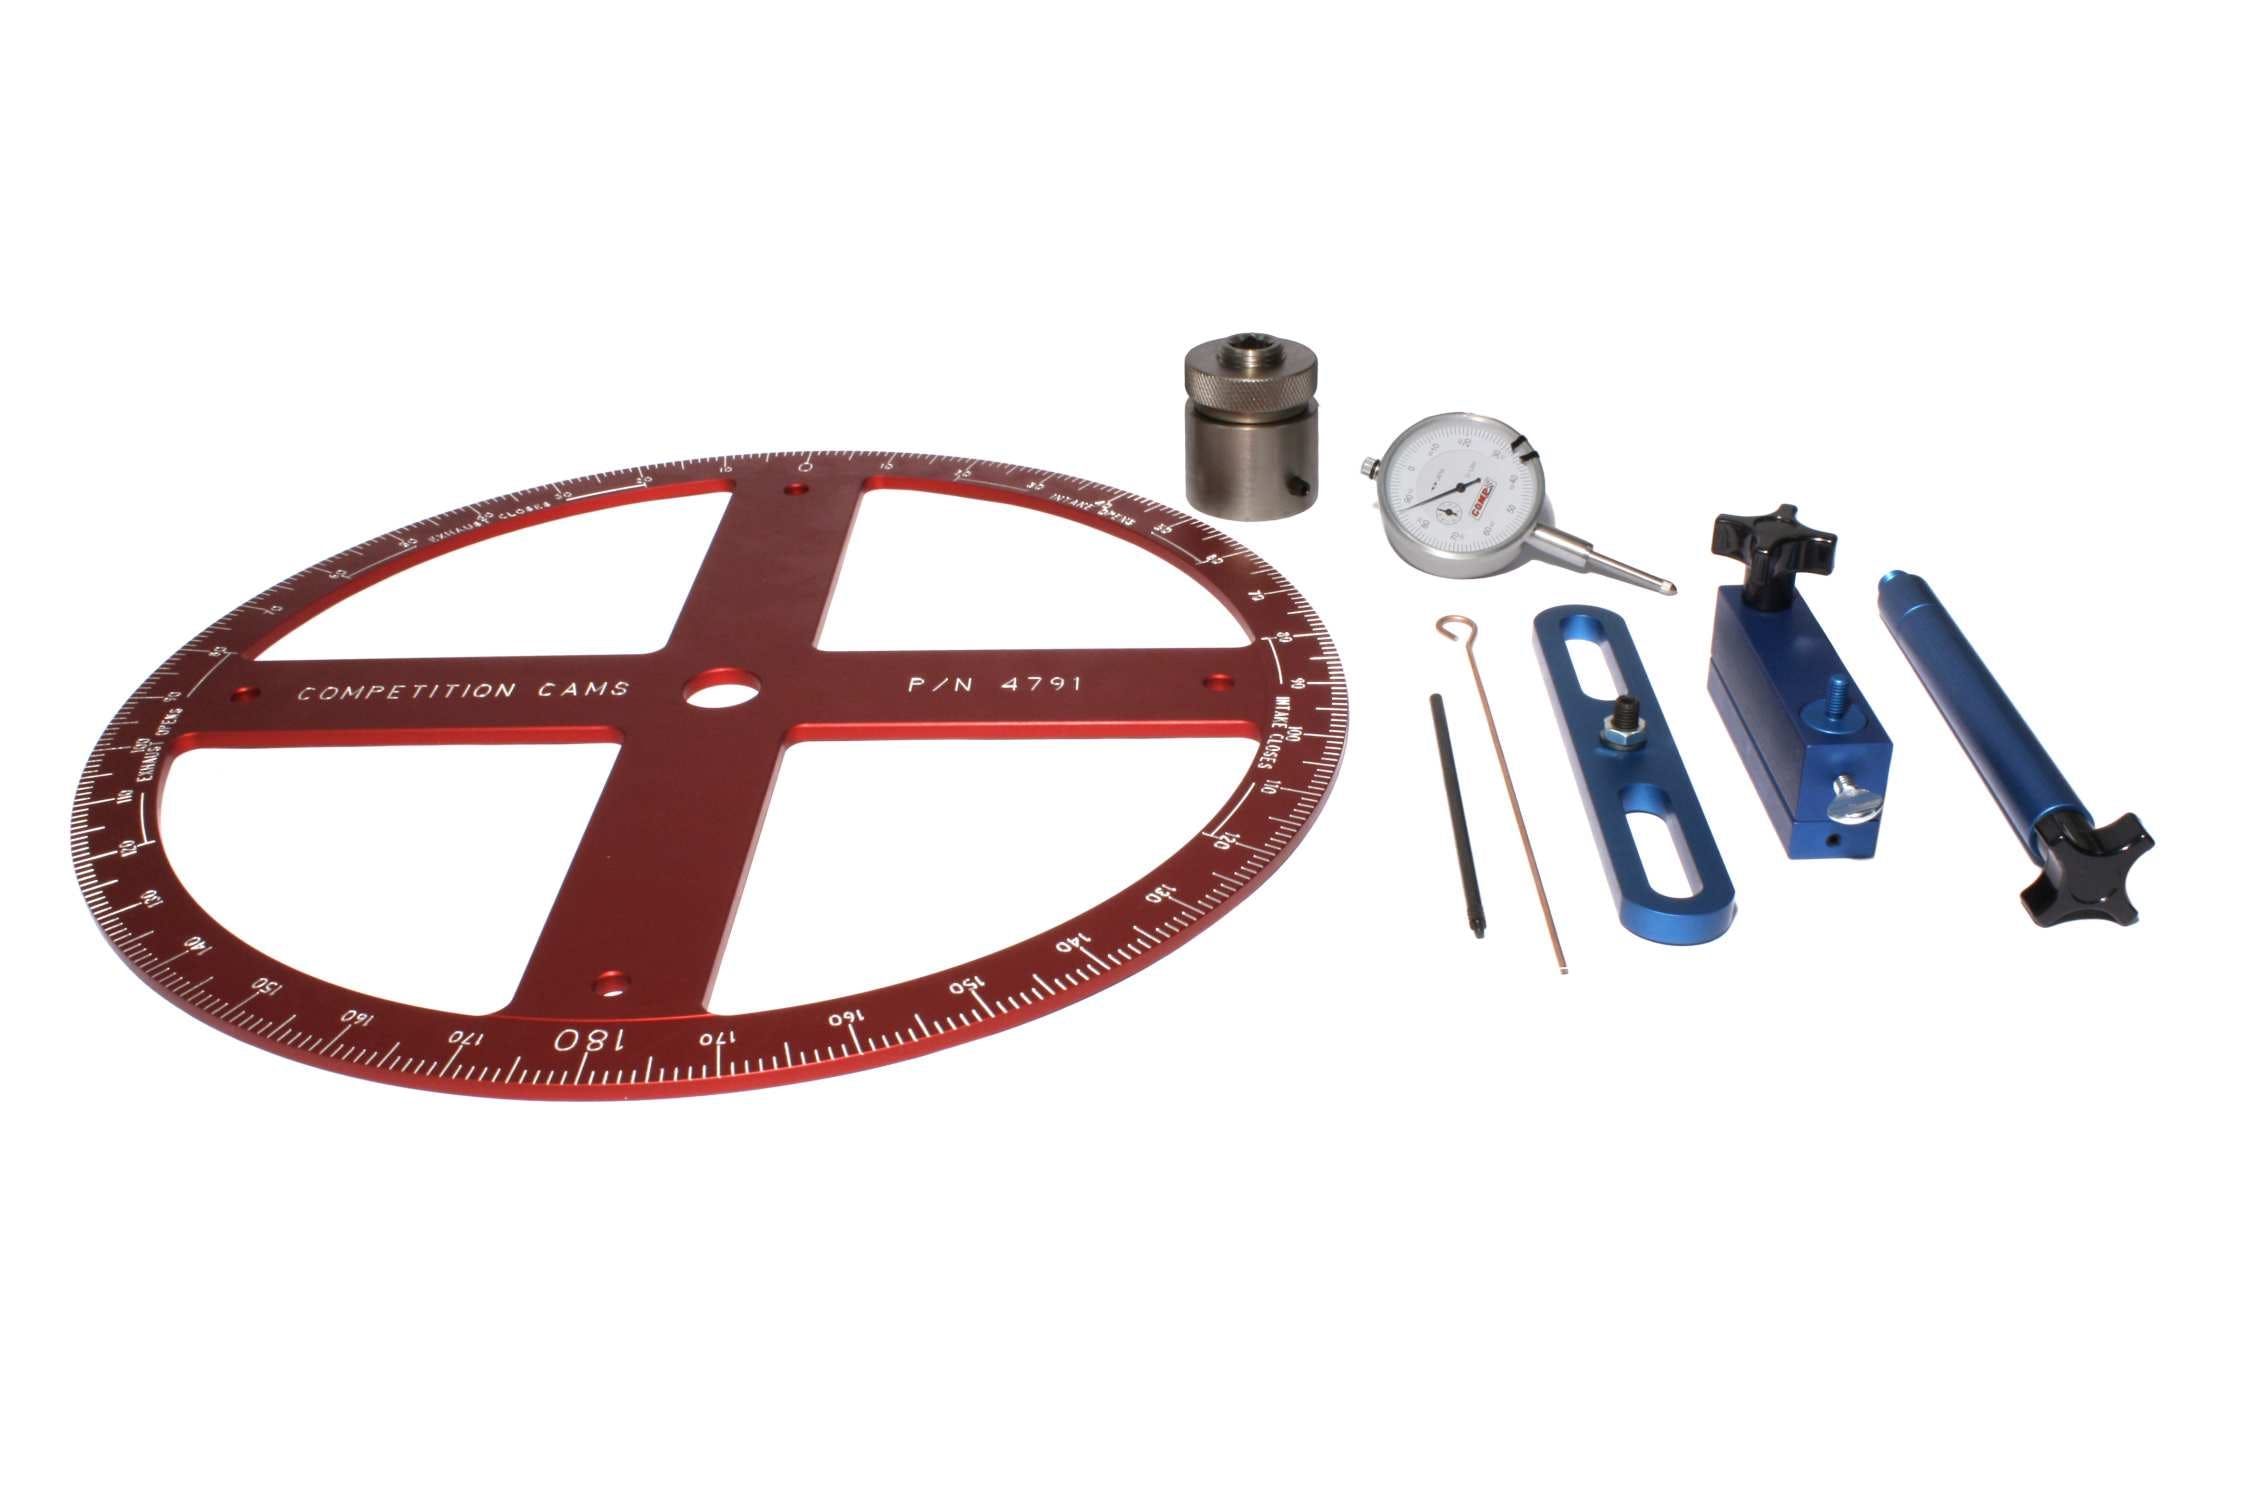 Competition Cams 4941 Pro Degree Wheel Kit